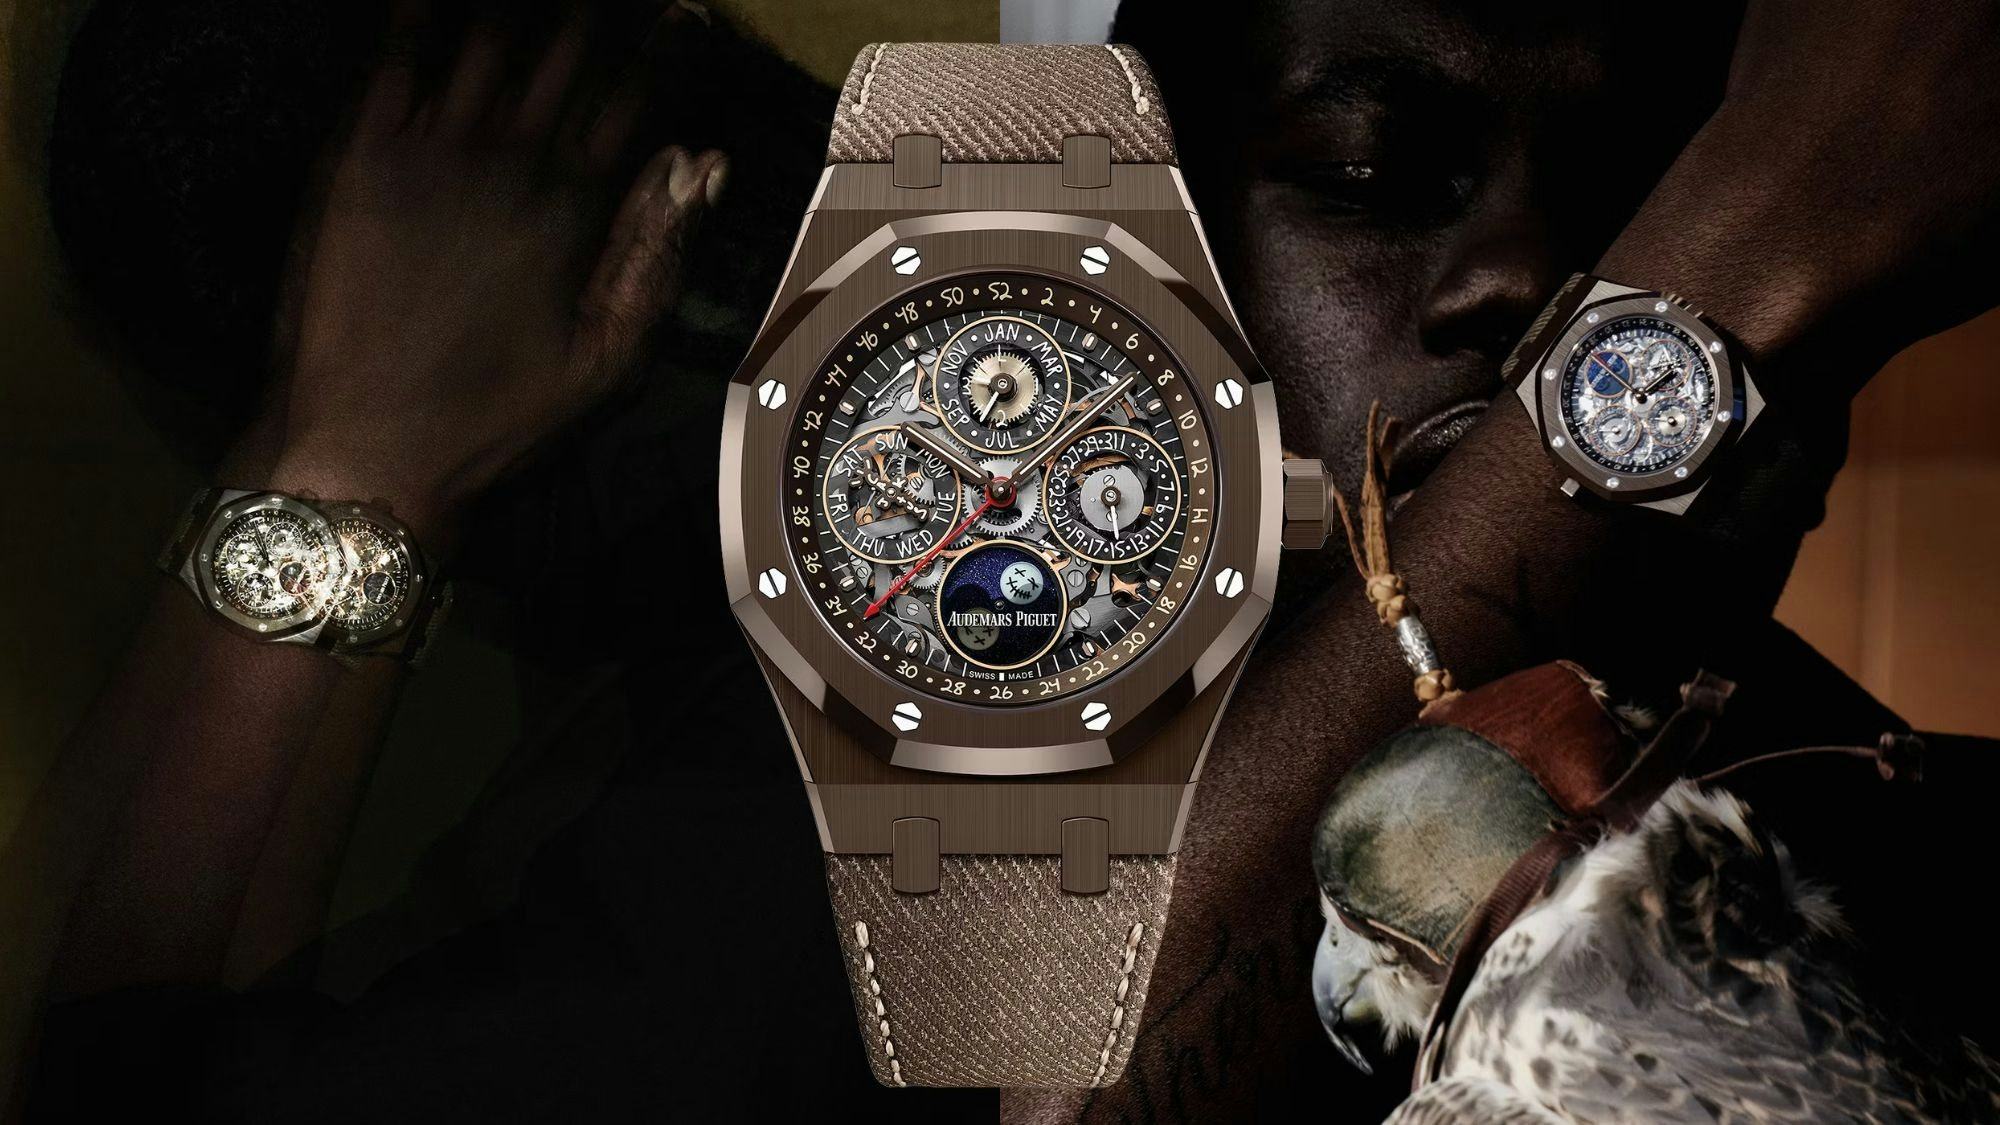 Audemars Piguet CEO Francis Bennahmias often bridges the worlds of hip hop and luxury watches, having collaborated with Jay-Z back in 2005, now it's Travis Scott's turn. Photo: Audemars Piguet